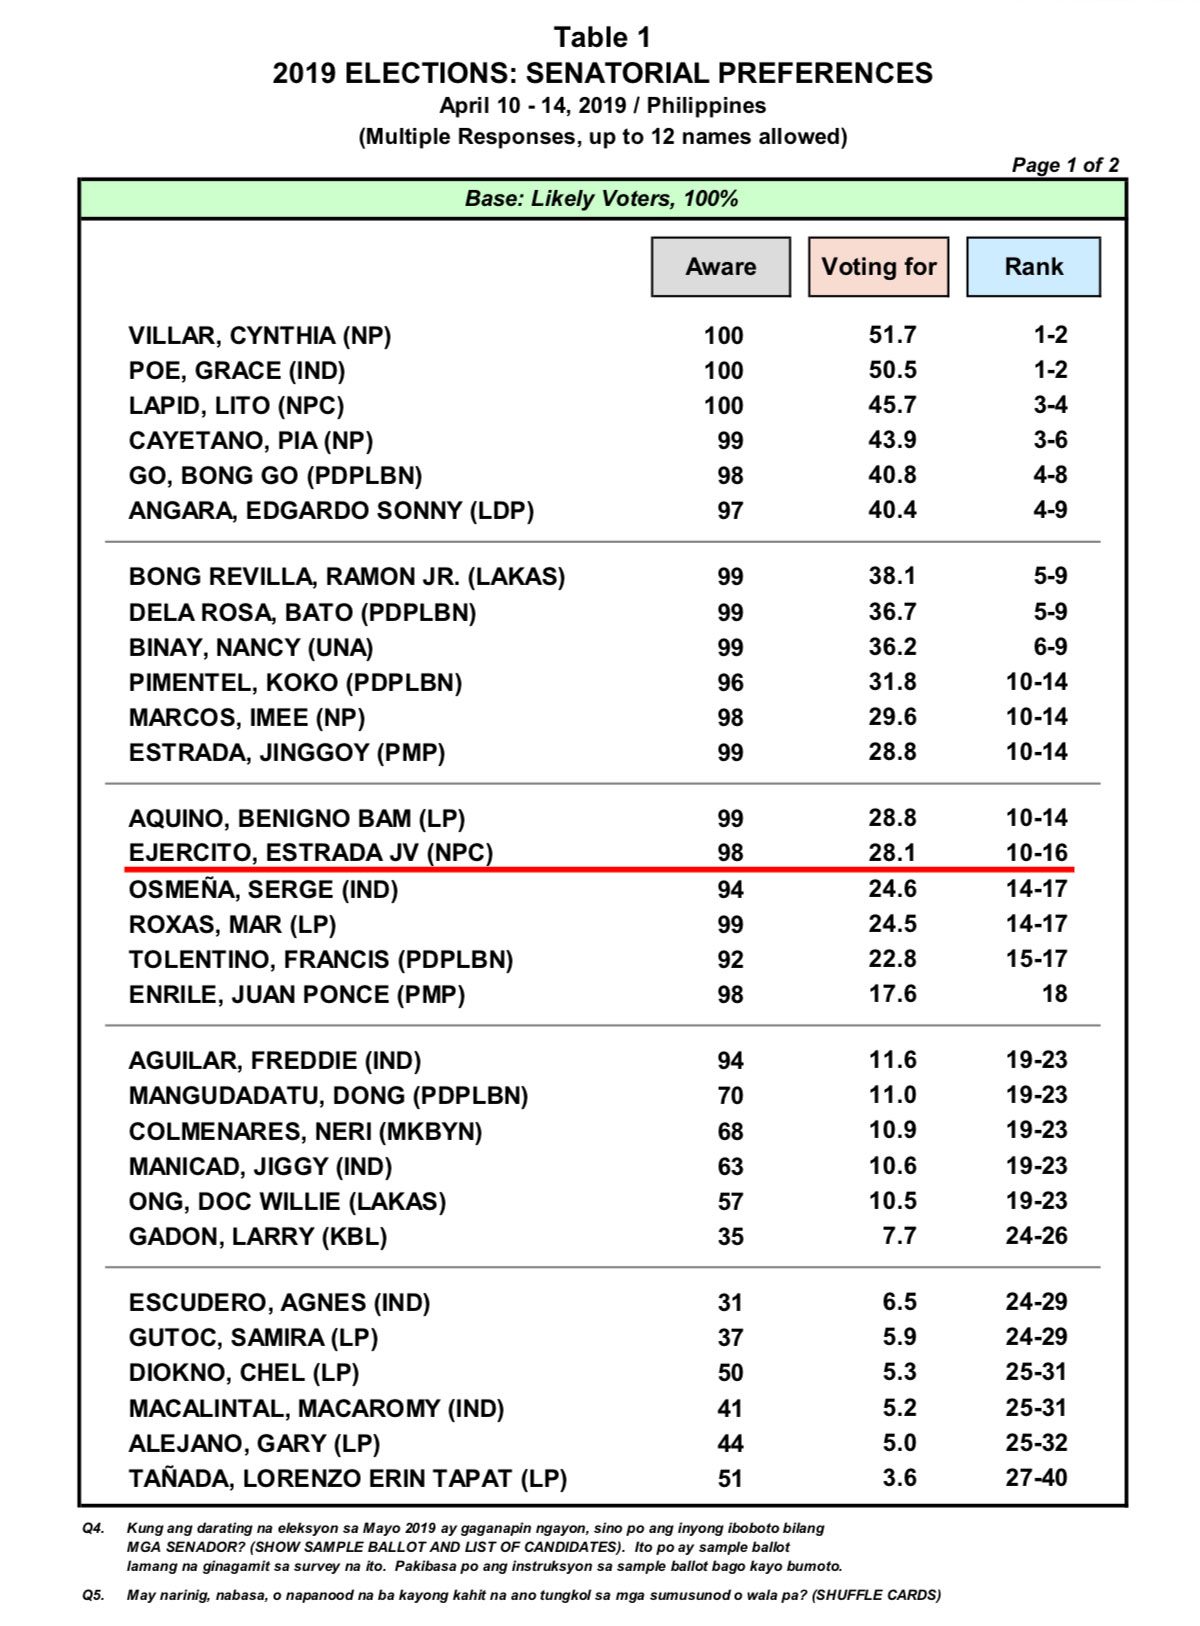 Table from Pulse Asia Research, Inc 